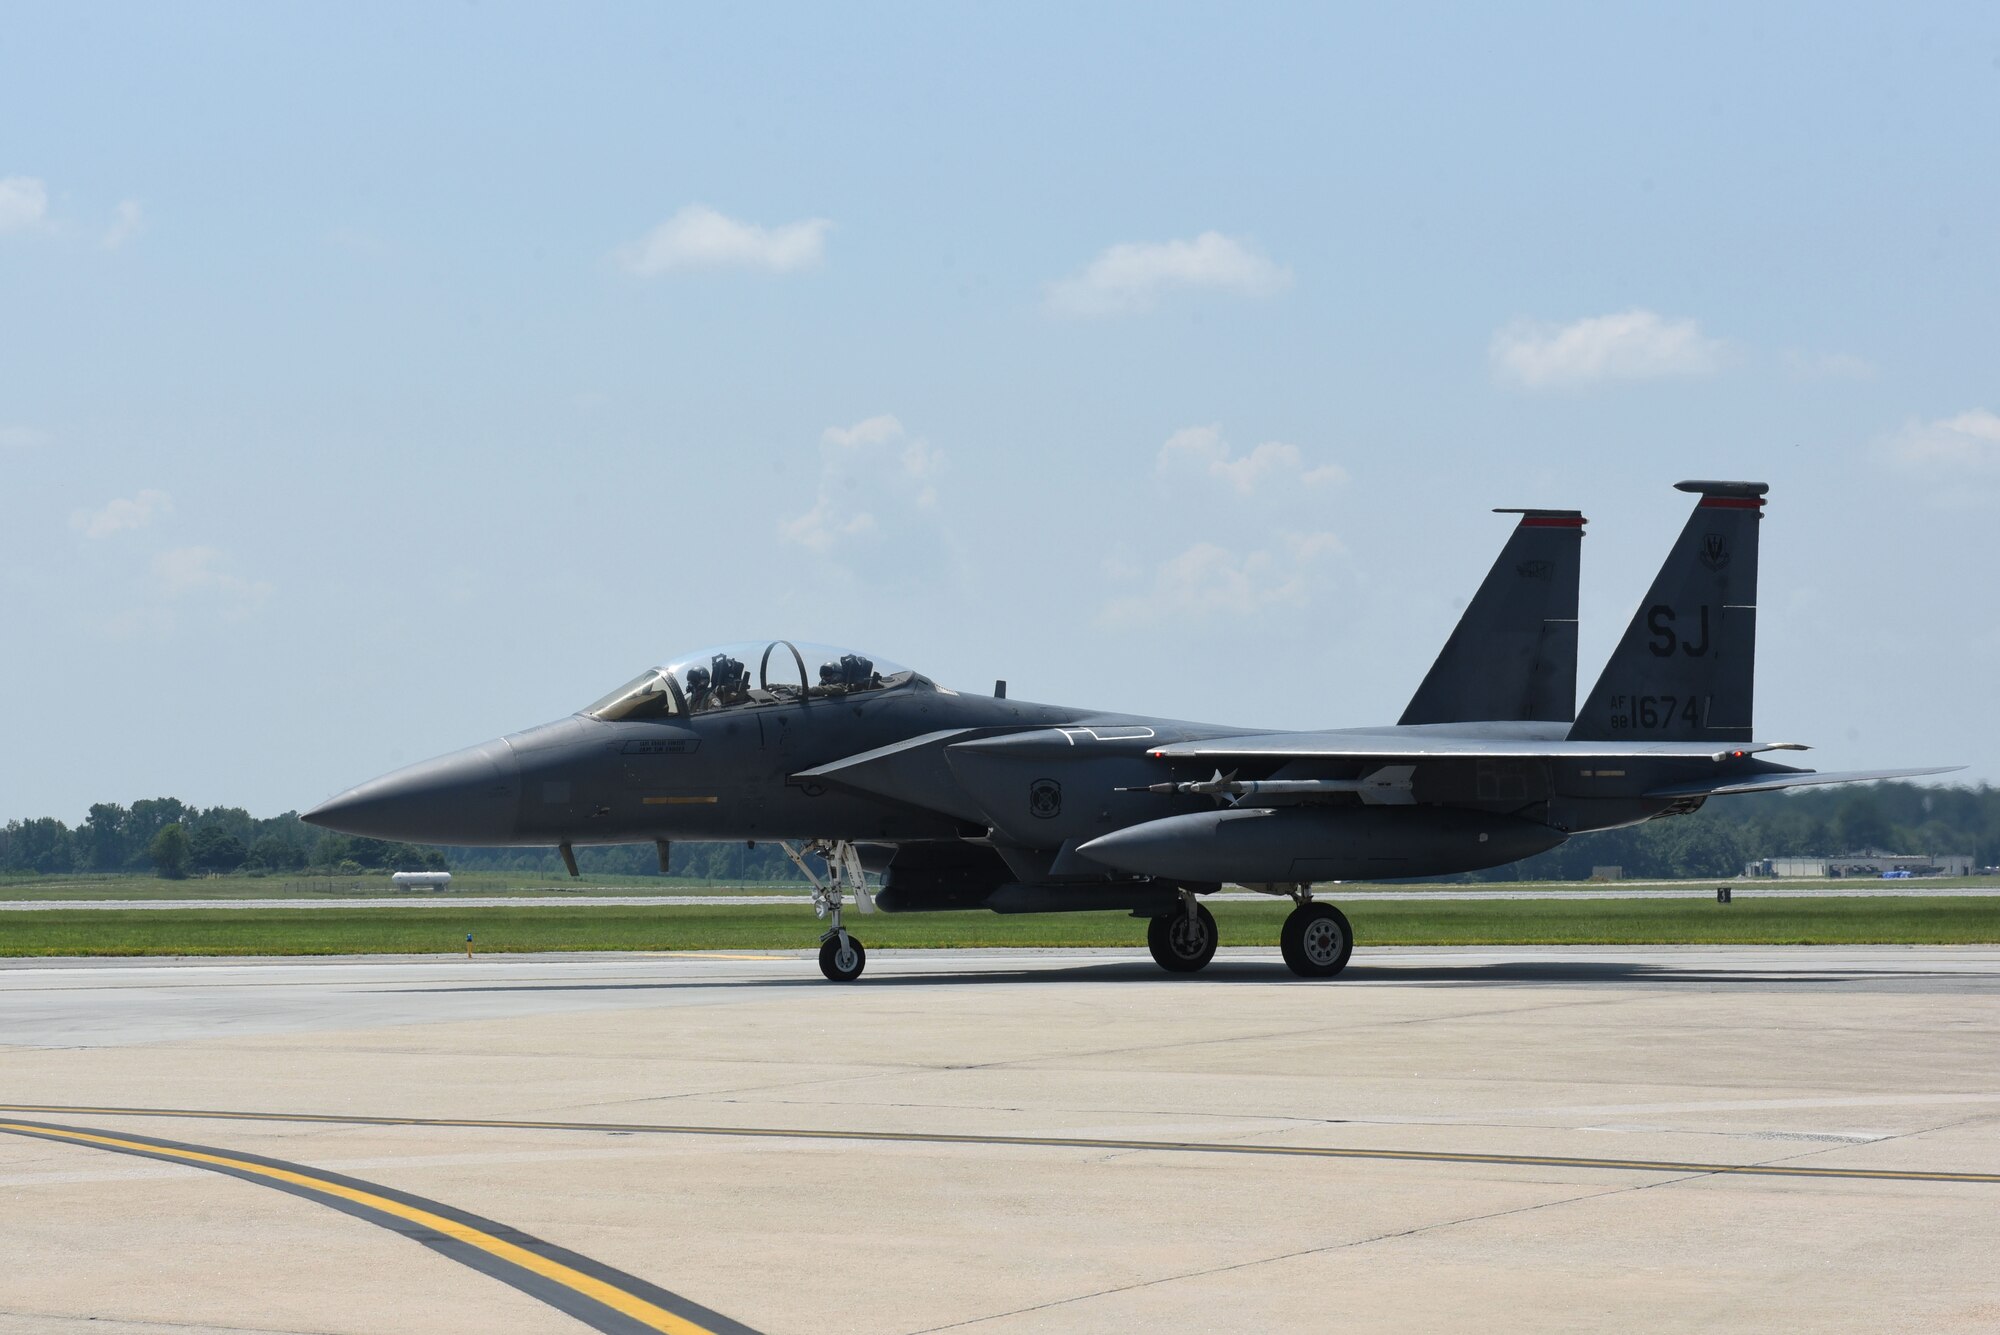 An F-15E Strike Eagle taxis to the runway during exercise Thunderdome 17-02, July 21, 2017, at Seymour Johnson Air Force Base, North Carolina. The exercise allowed members of the 4th Fighter Wing to strengthen skills for real-world operations. (U.S. Air Force photo by Airman 1st Class Victoria Boyton)